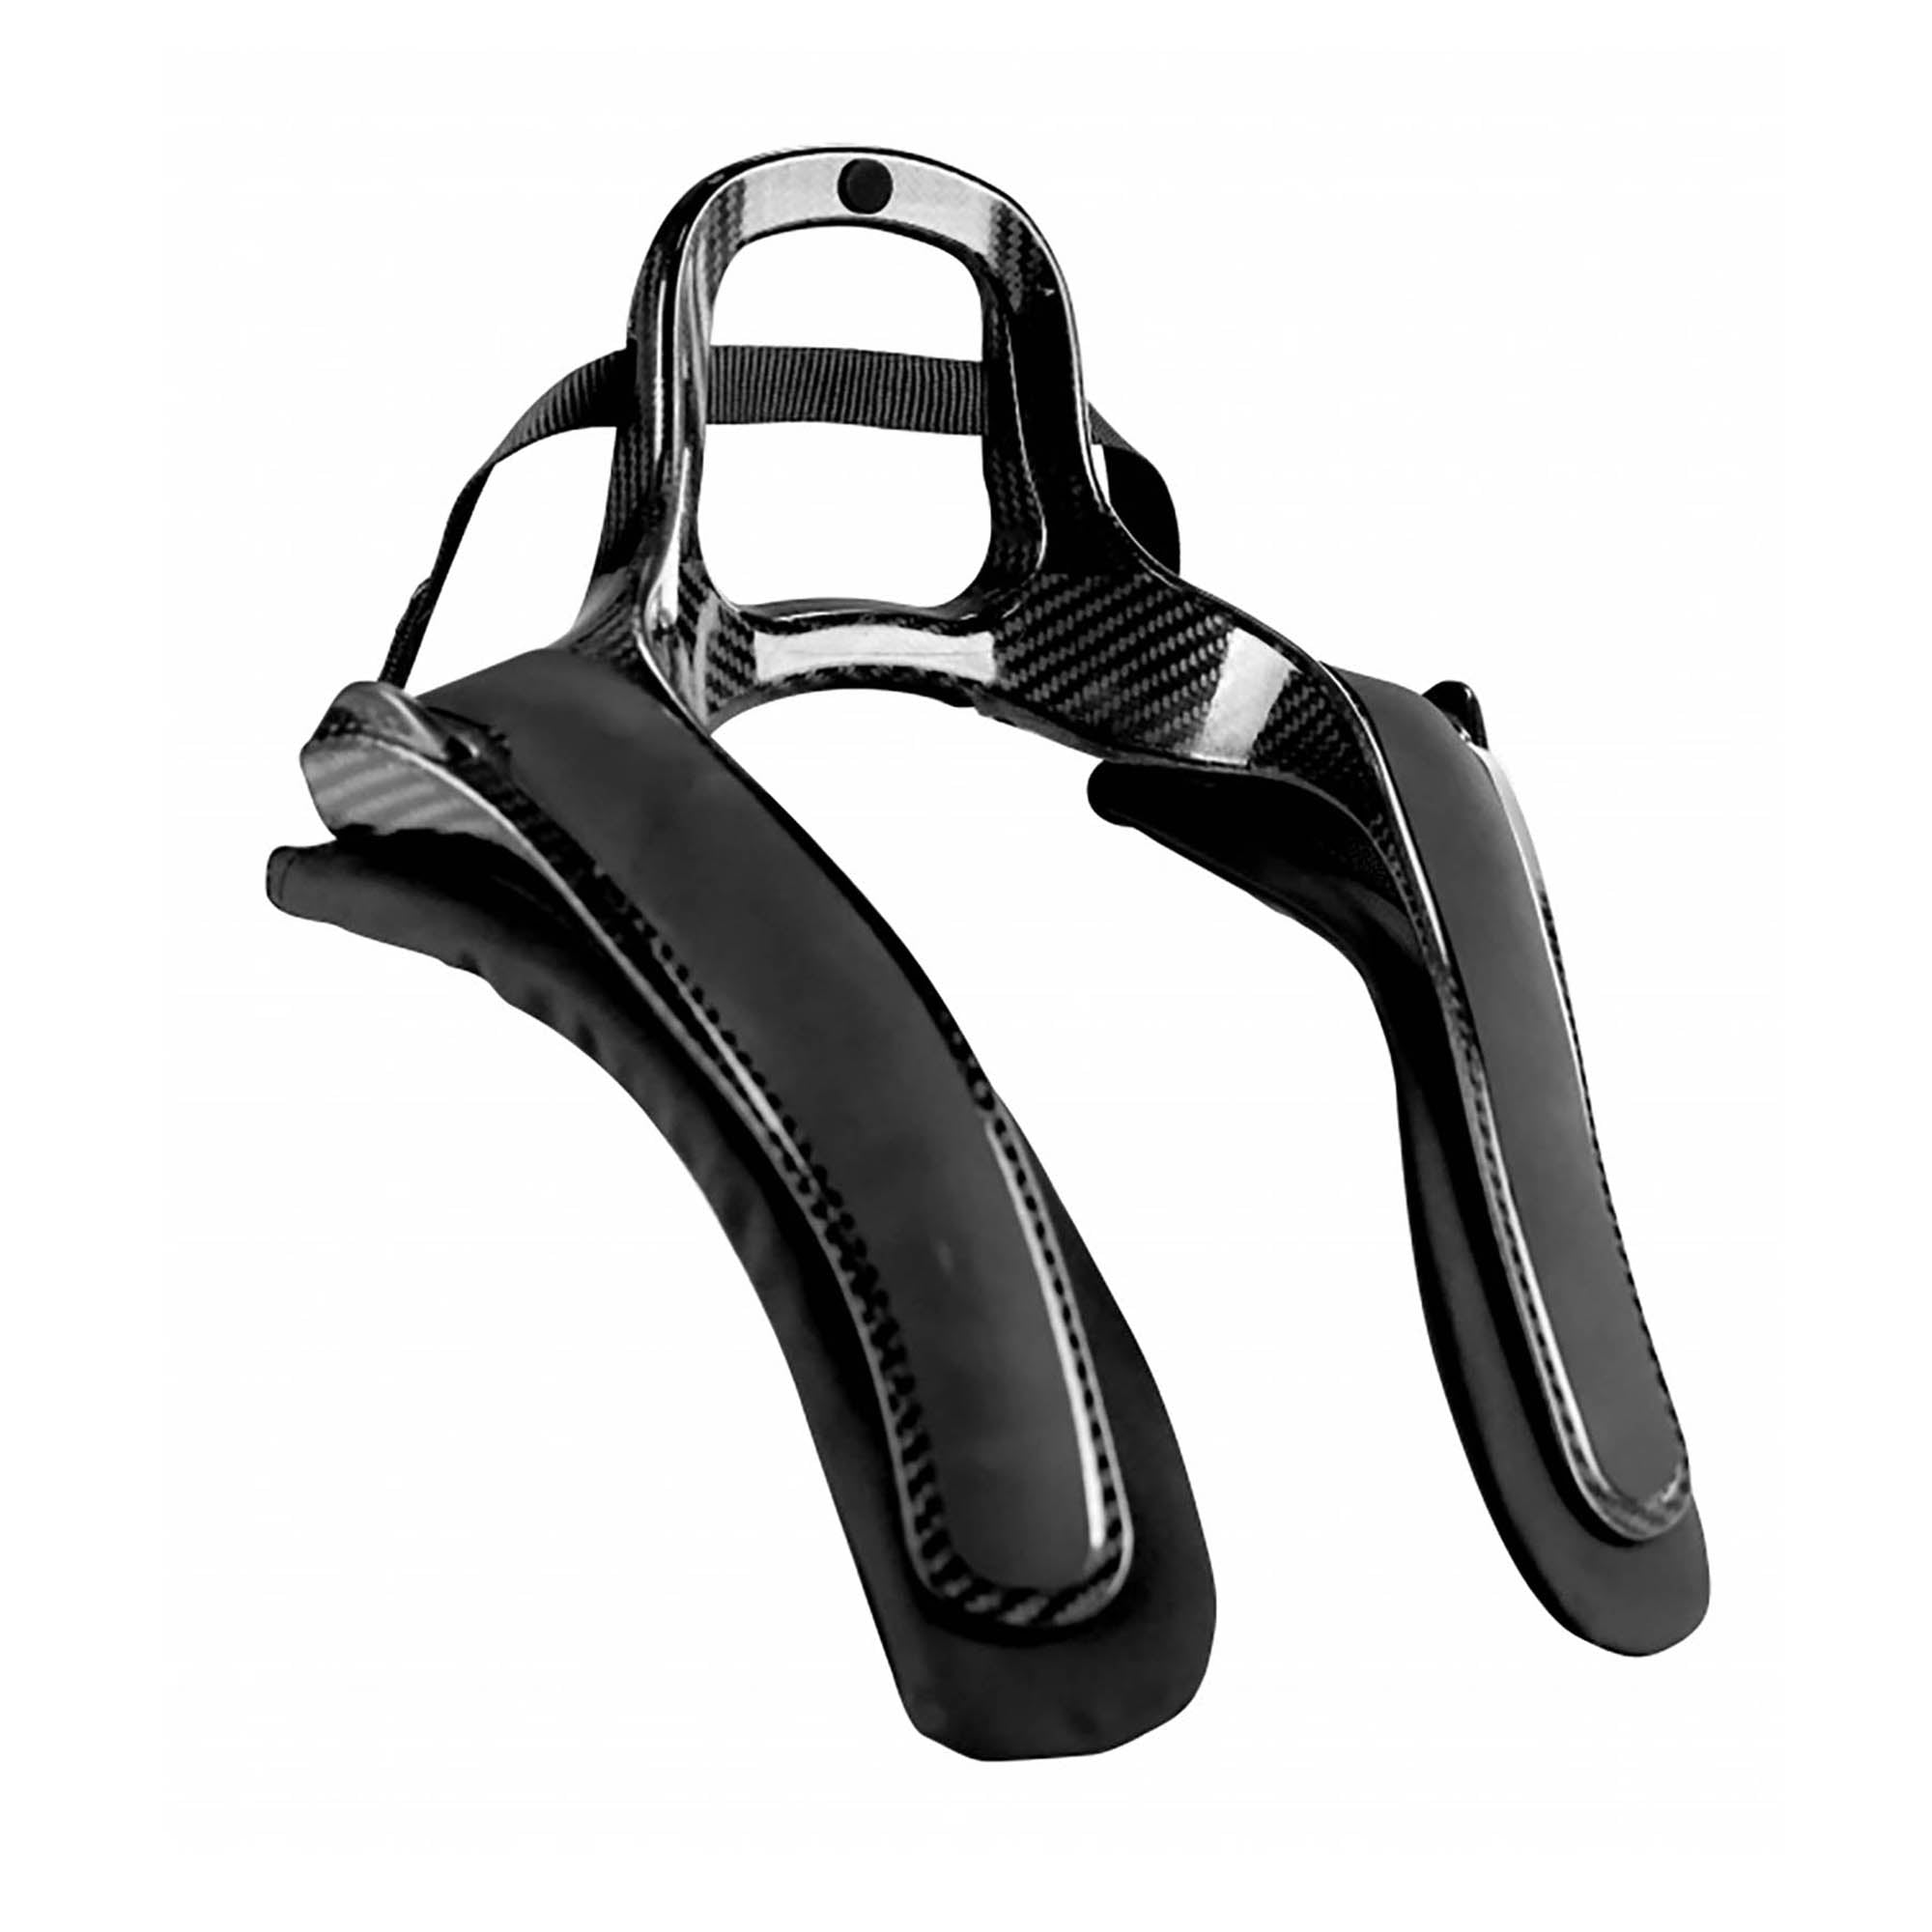 Stand 21 Featherlite 30 Head and Neck Restraint